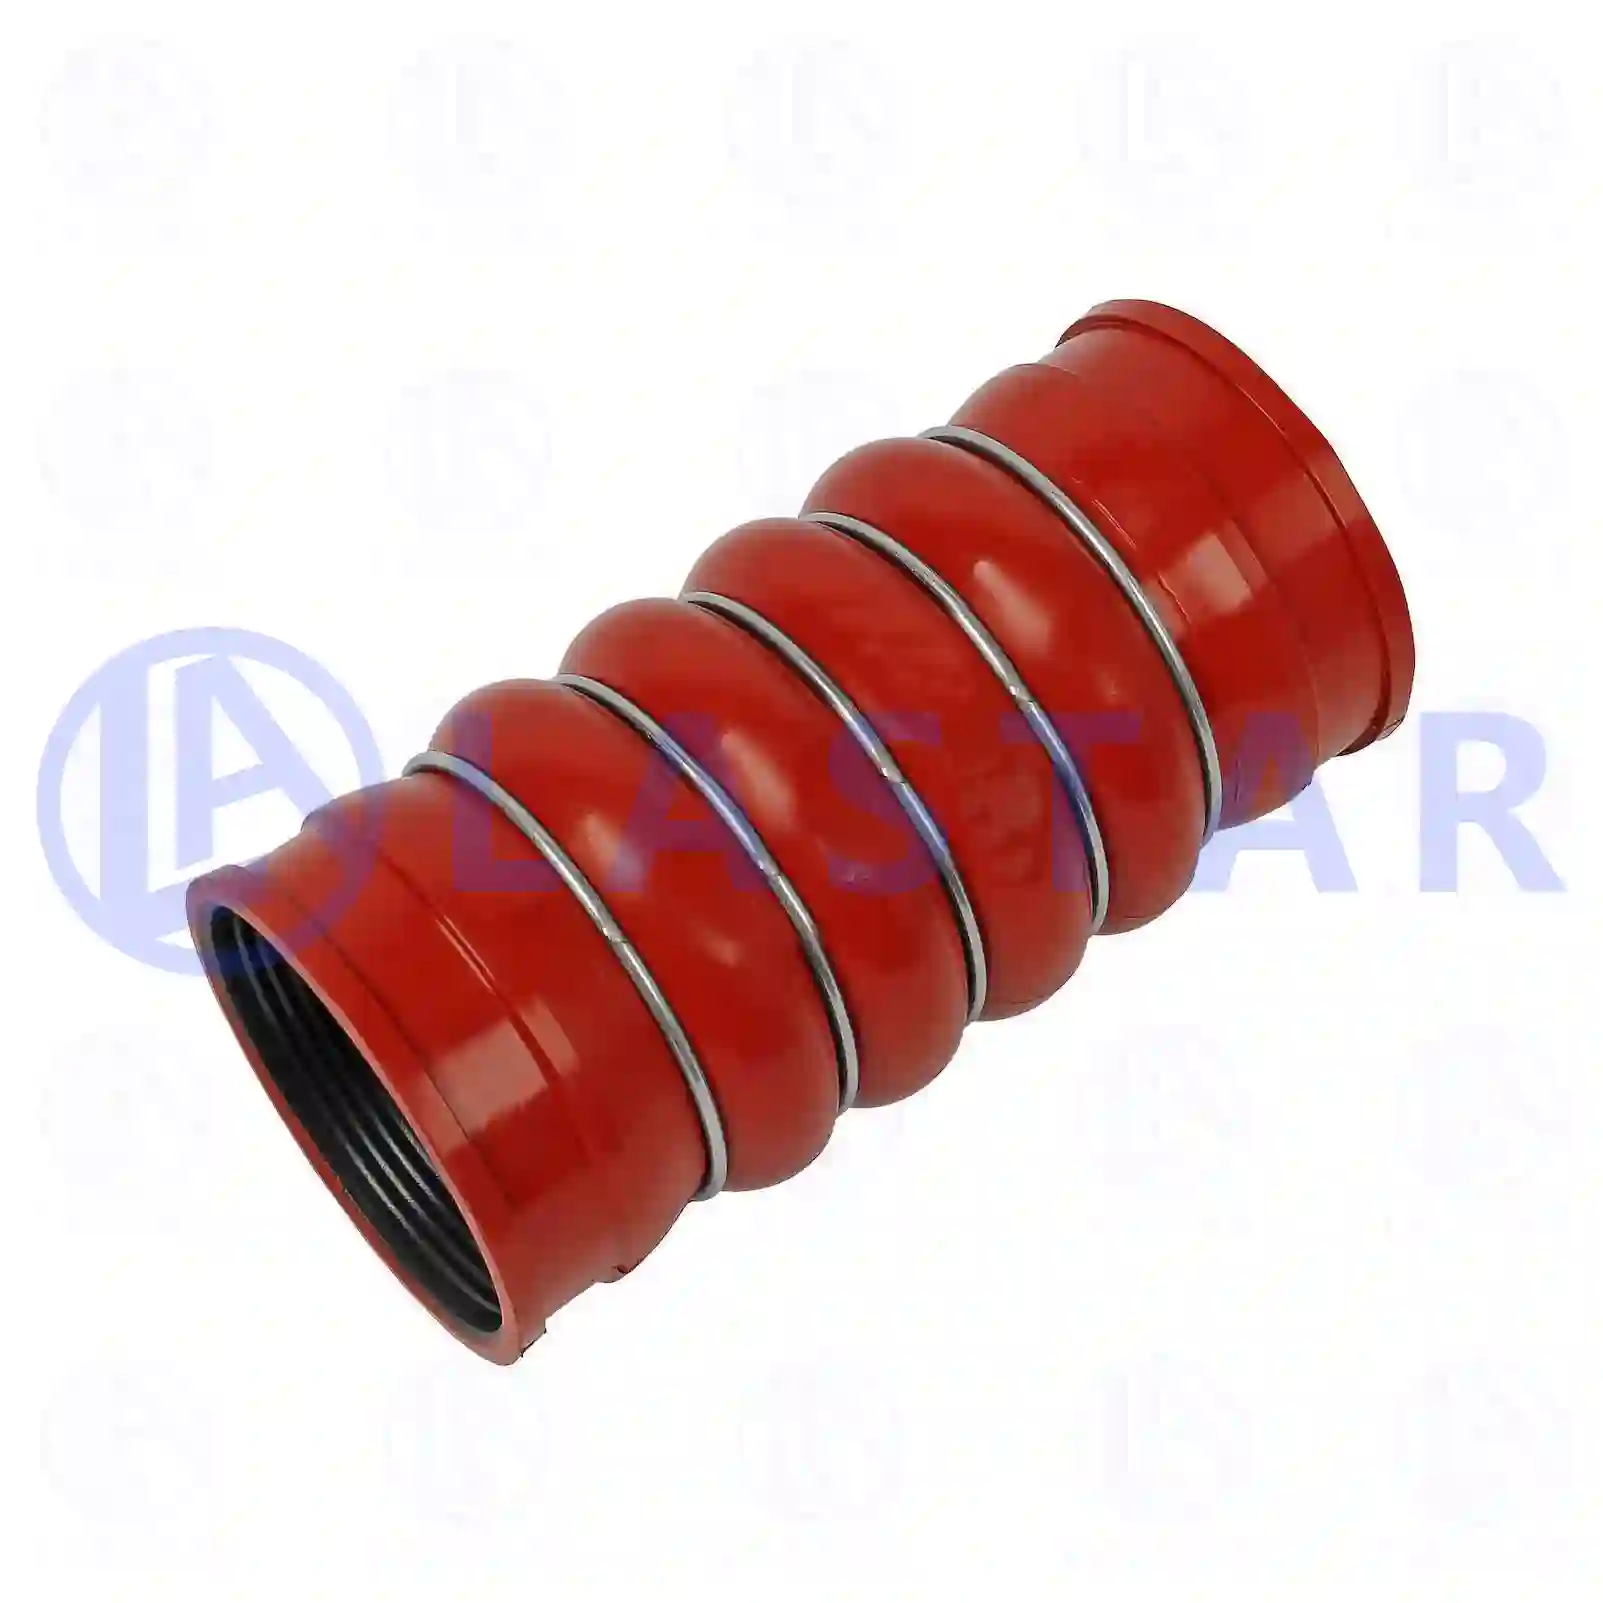 Charge air hose, 77708280, 0005010082, 0005010182, 0005016082, 0005016182, 0015016182, 0015017982, 0015018082, ZG00301-0008 ||  77708280 Lastar Spare Part | Truck Spare Parts, Auotomotive Spare Parts Charge air hose, 77708280, 0005010082, 0005010182, 0005016082, 0005016182, 0015016182, 0015017982, 0015018082, ZG00301-0008 ||  77708280 Lastar Spare Part | Truck Spare Parts, Auotomotive Spare Parts